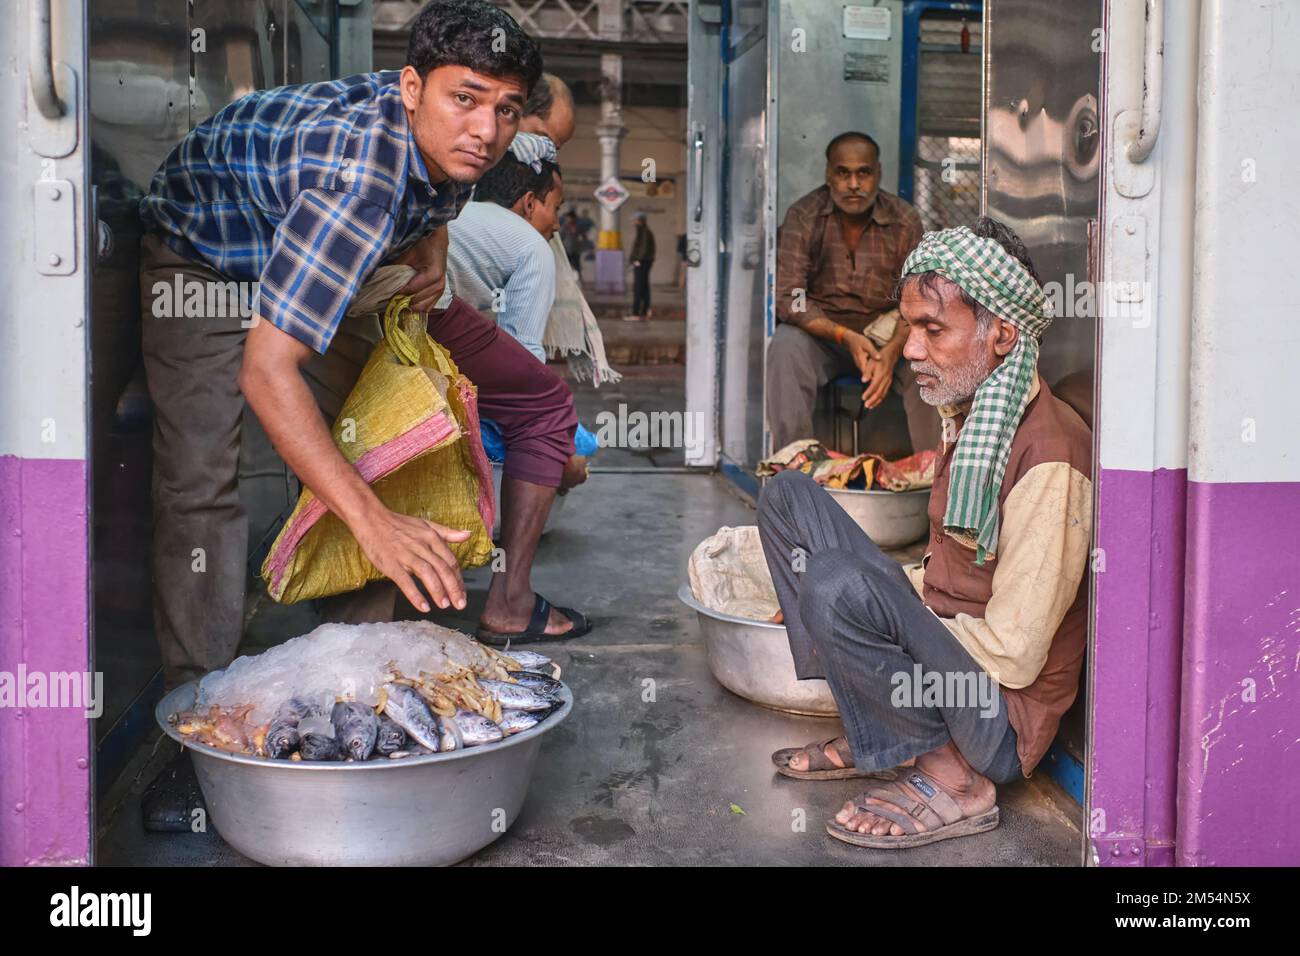 Porters with trays of fish sitting in the luggage compartment of a local train at Chhatrapati Shivaji Maharaj Terminus (CSMT) in Mumbai, India Stock Photo